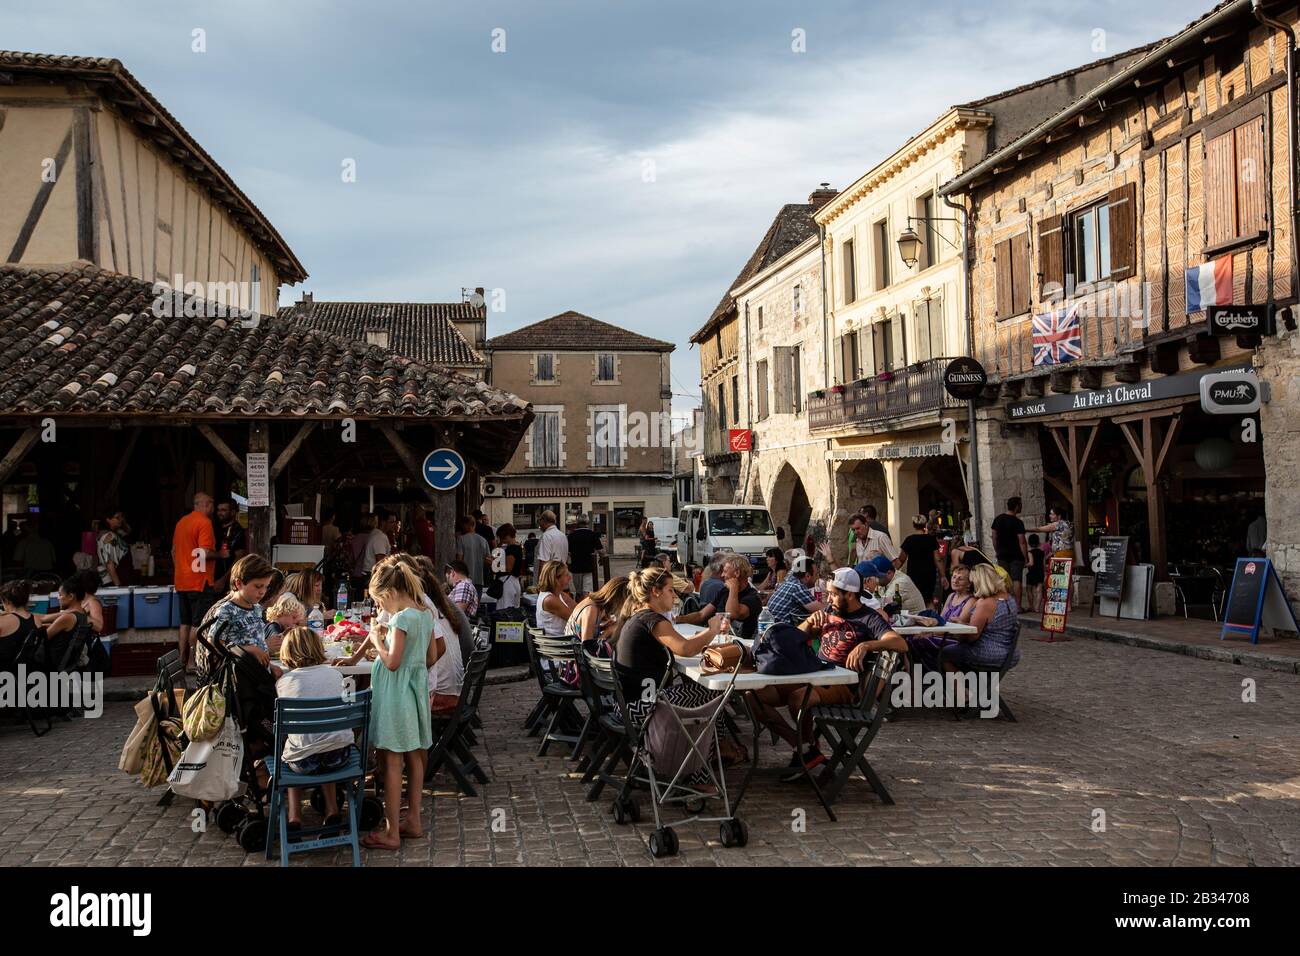 Villeréal medieval bastide town in the Lot-et-Garonne department in south-western France, Europe Stock Photo